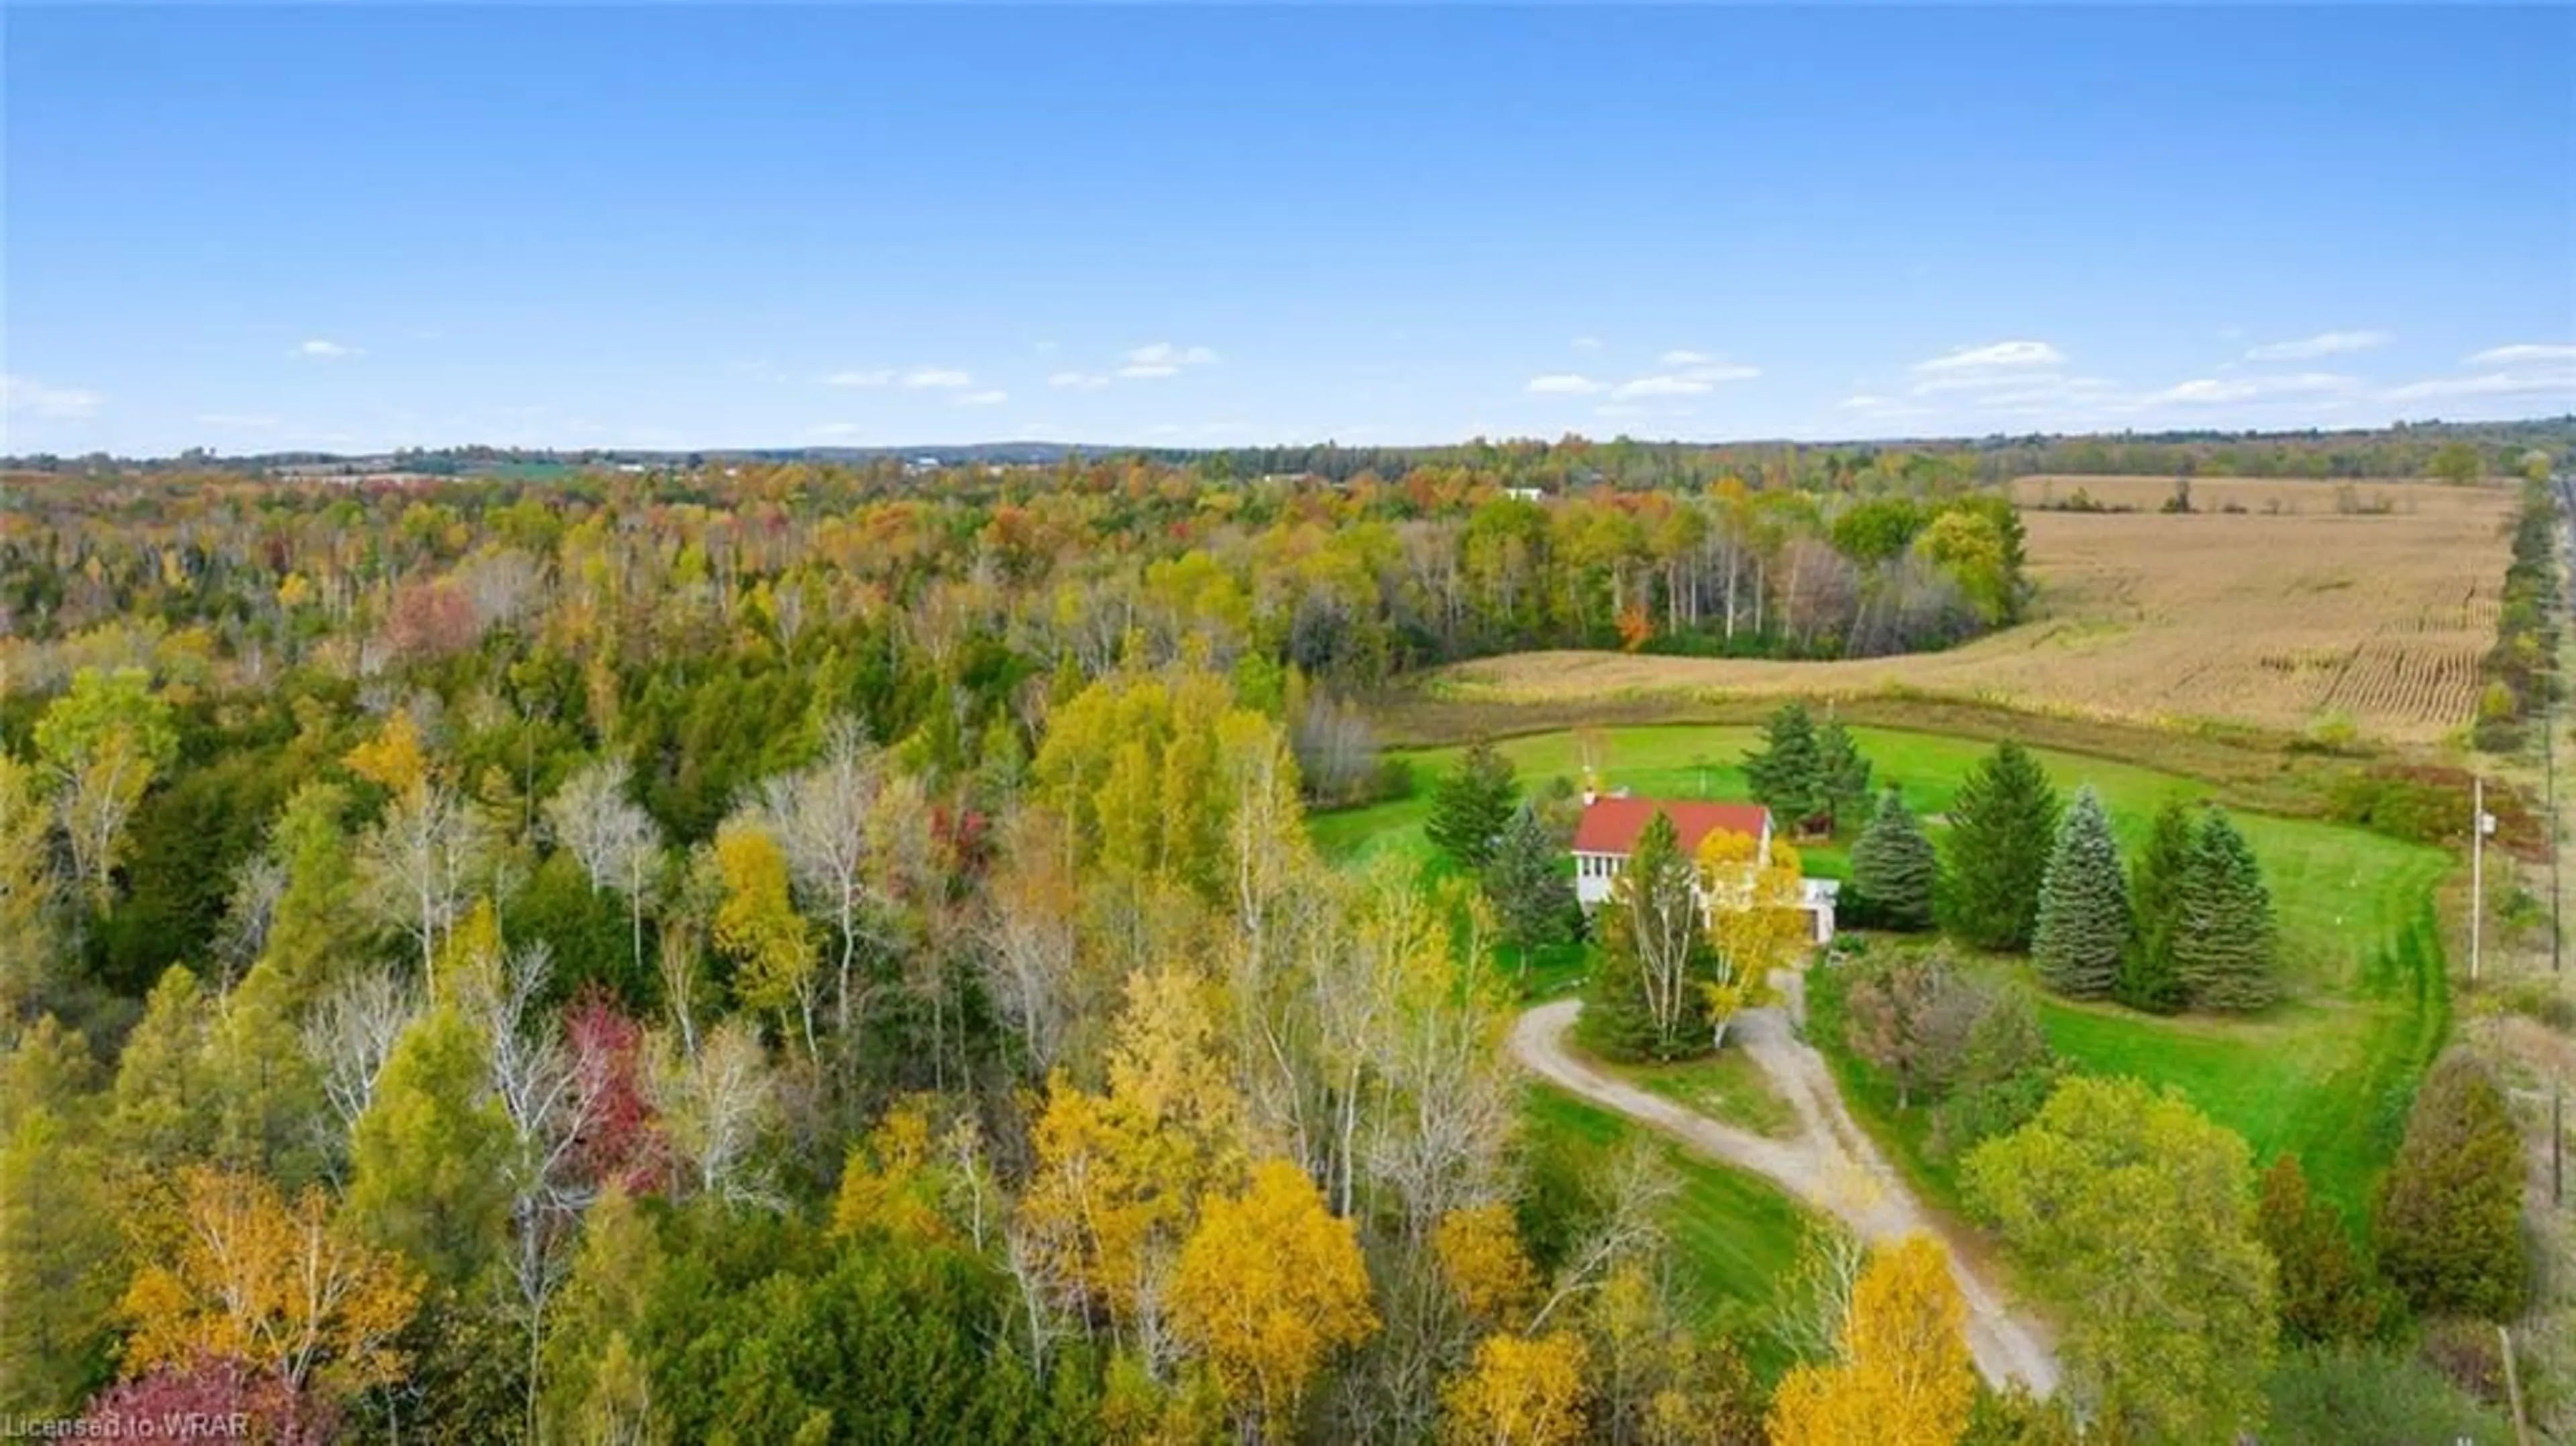 Forest view for 7530 Macpherson's Lane, Puslinch Ontario N0B 2J0